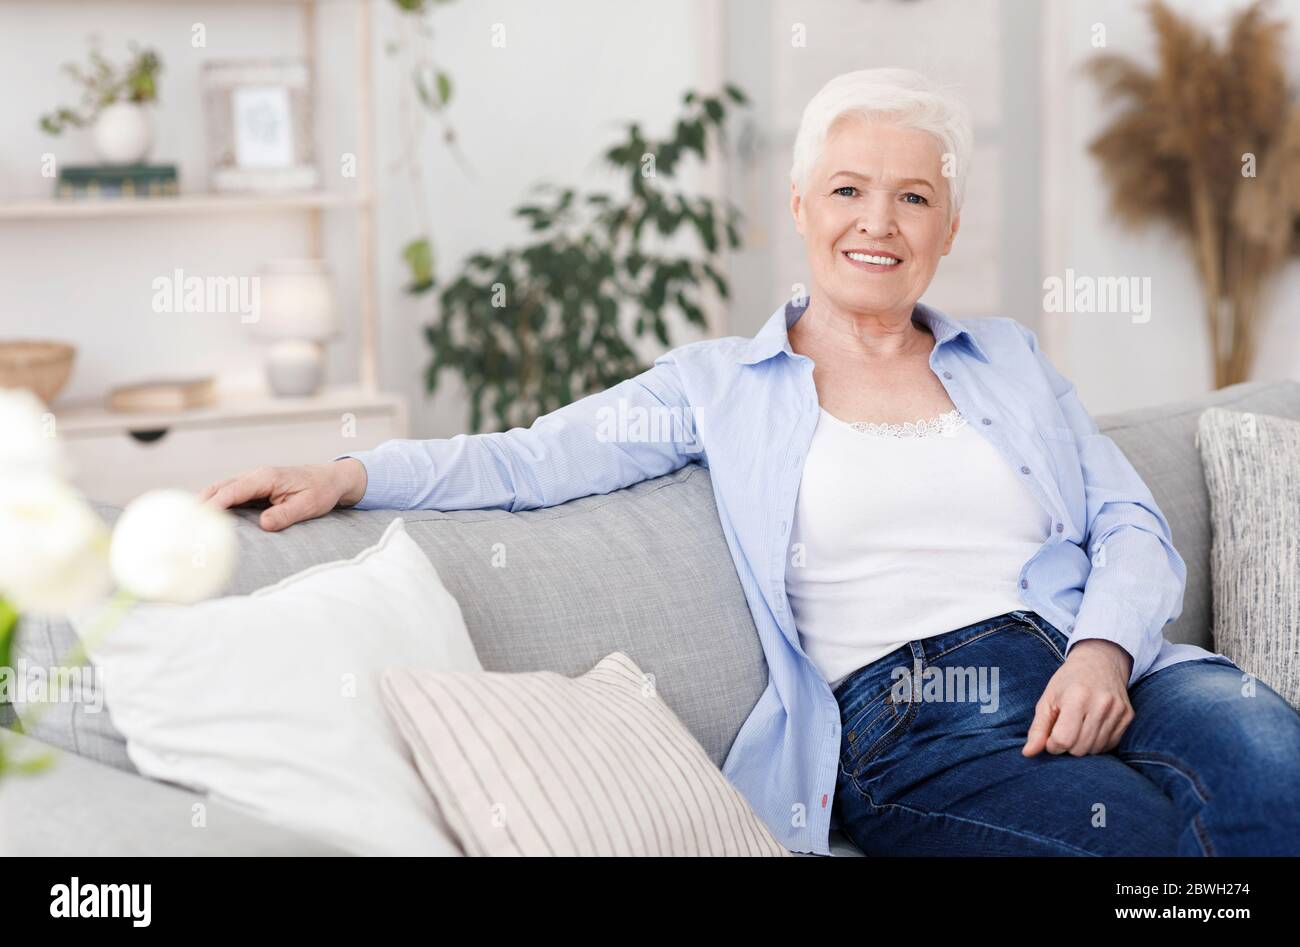 Smiling Elderly Lady Posing On Couch In Living Room At Home Stock Photo